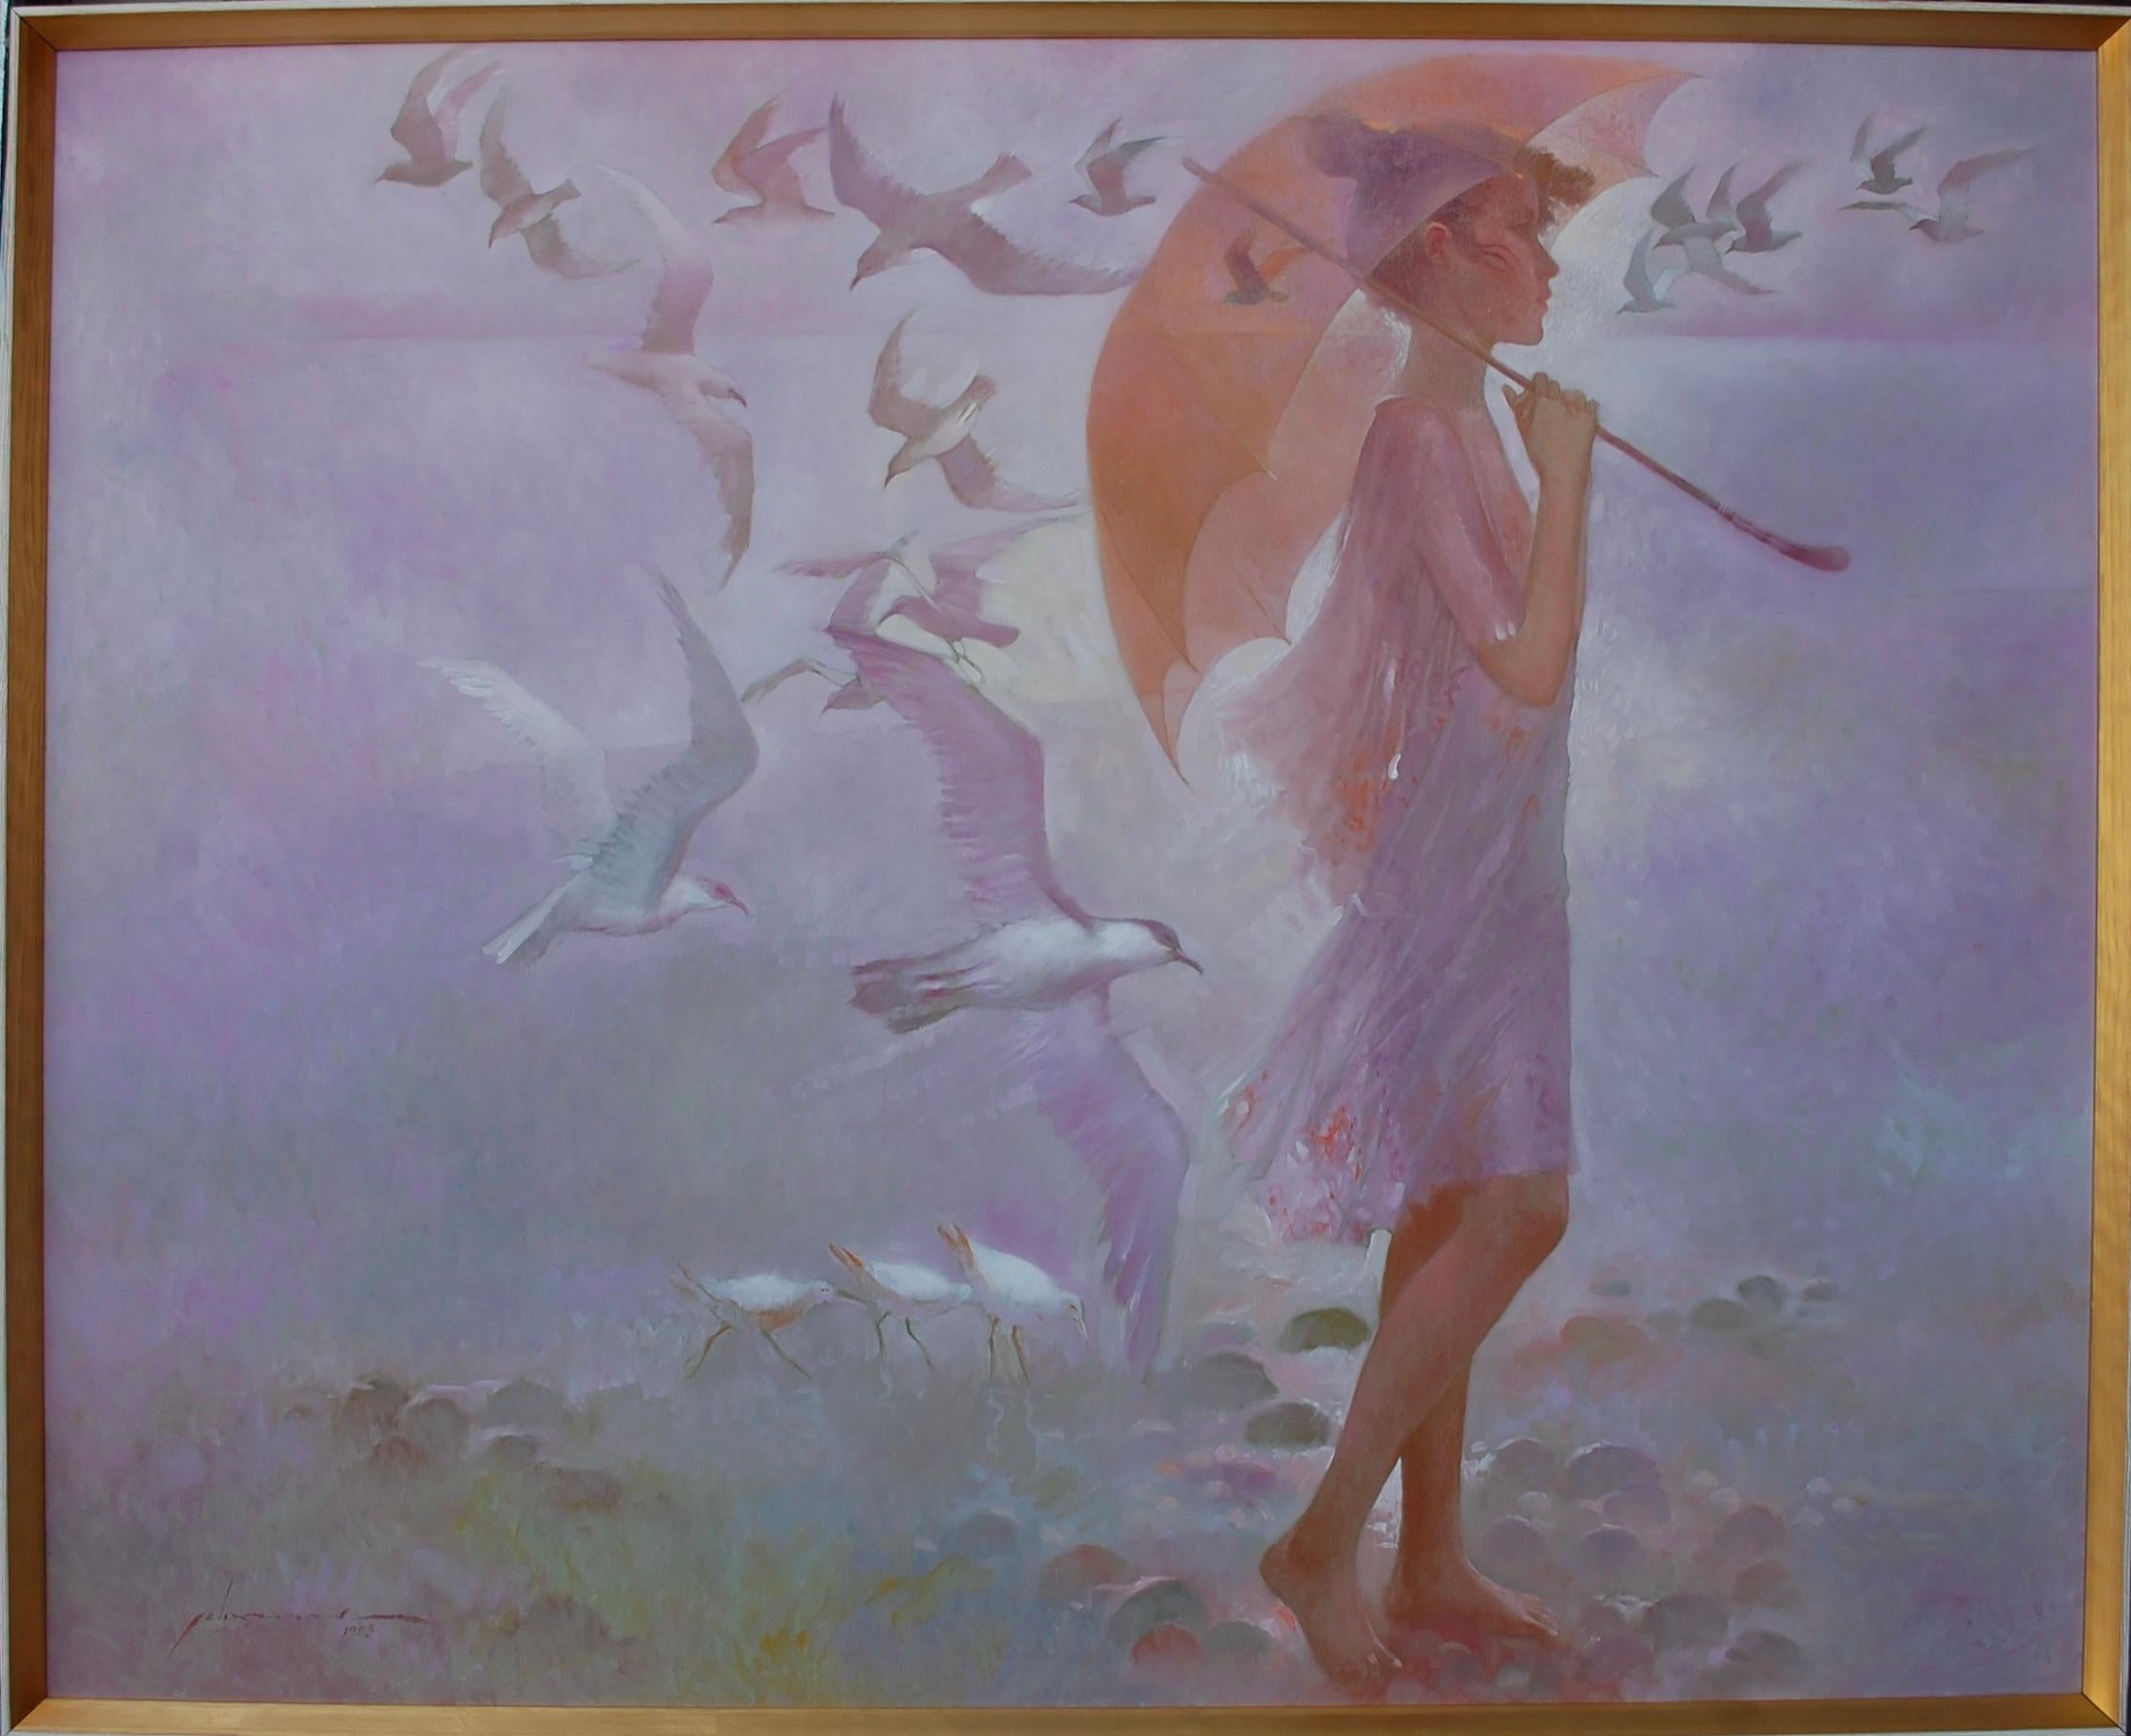  Young Woman Walking On The Beach Large Painting
Artist signed and titled. 
Artist signed, dated and titled, floater white-gold frame.
Ethereal oil on canvas figural painting, titled Playa Amarillo (Yellow Beach) work features a portrait of three